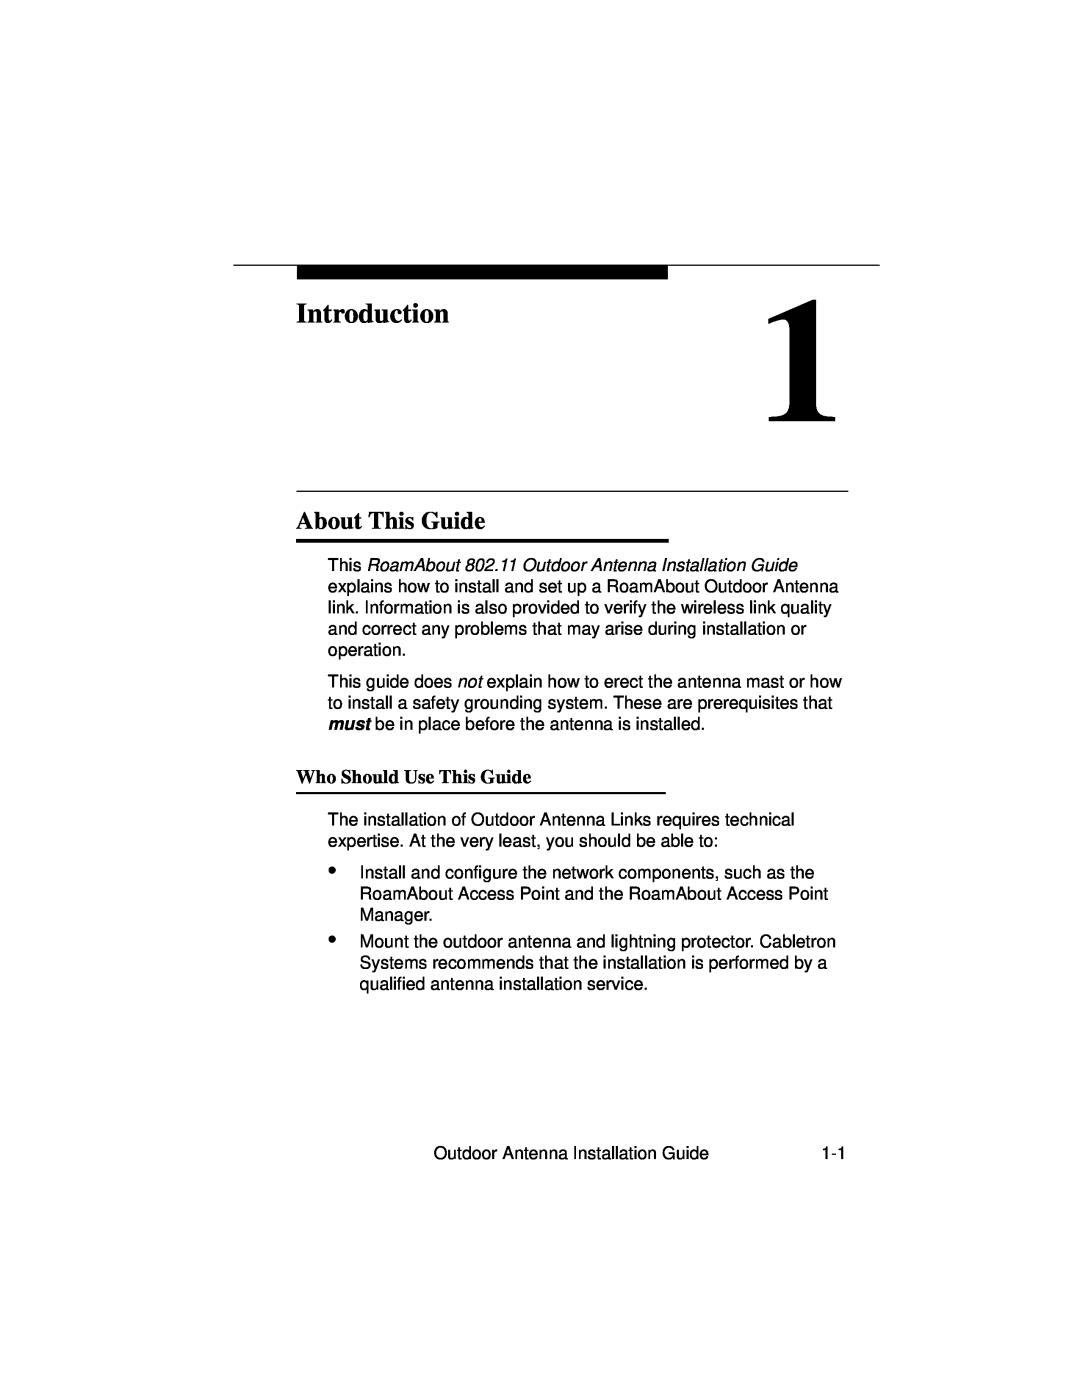 Cabletron Systems 9033073 manual Introduction, About This Guide, Who Should Use This Guide 